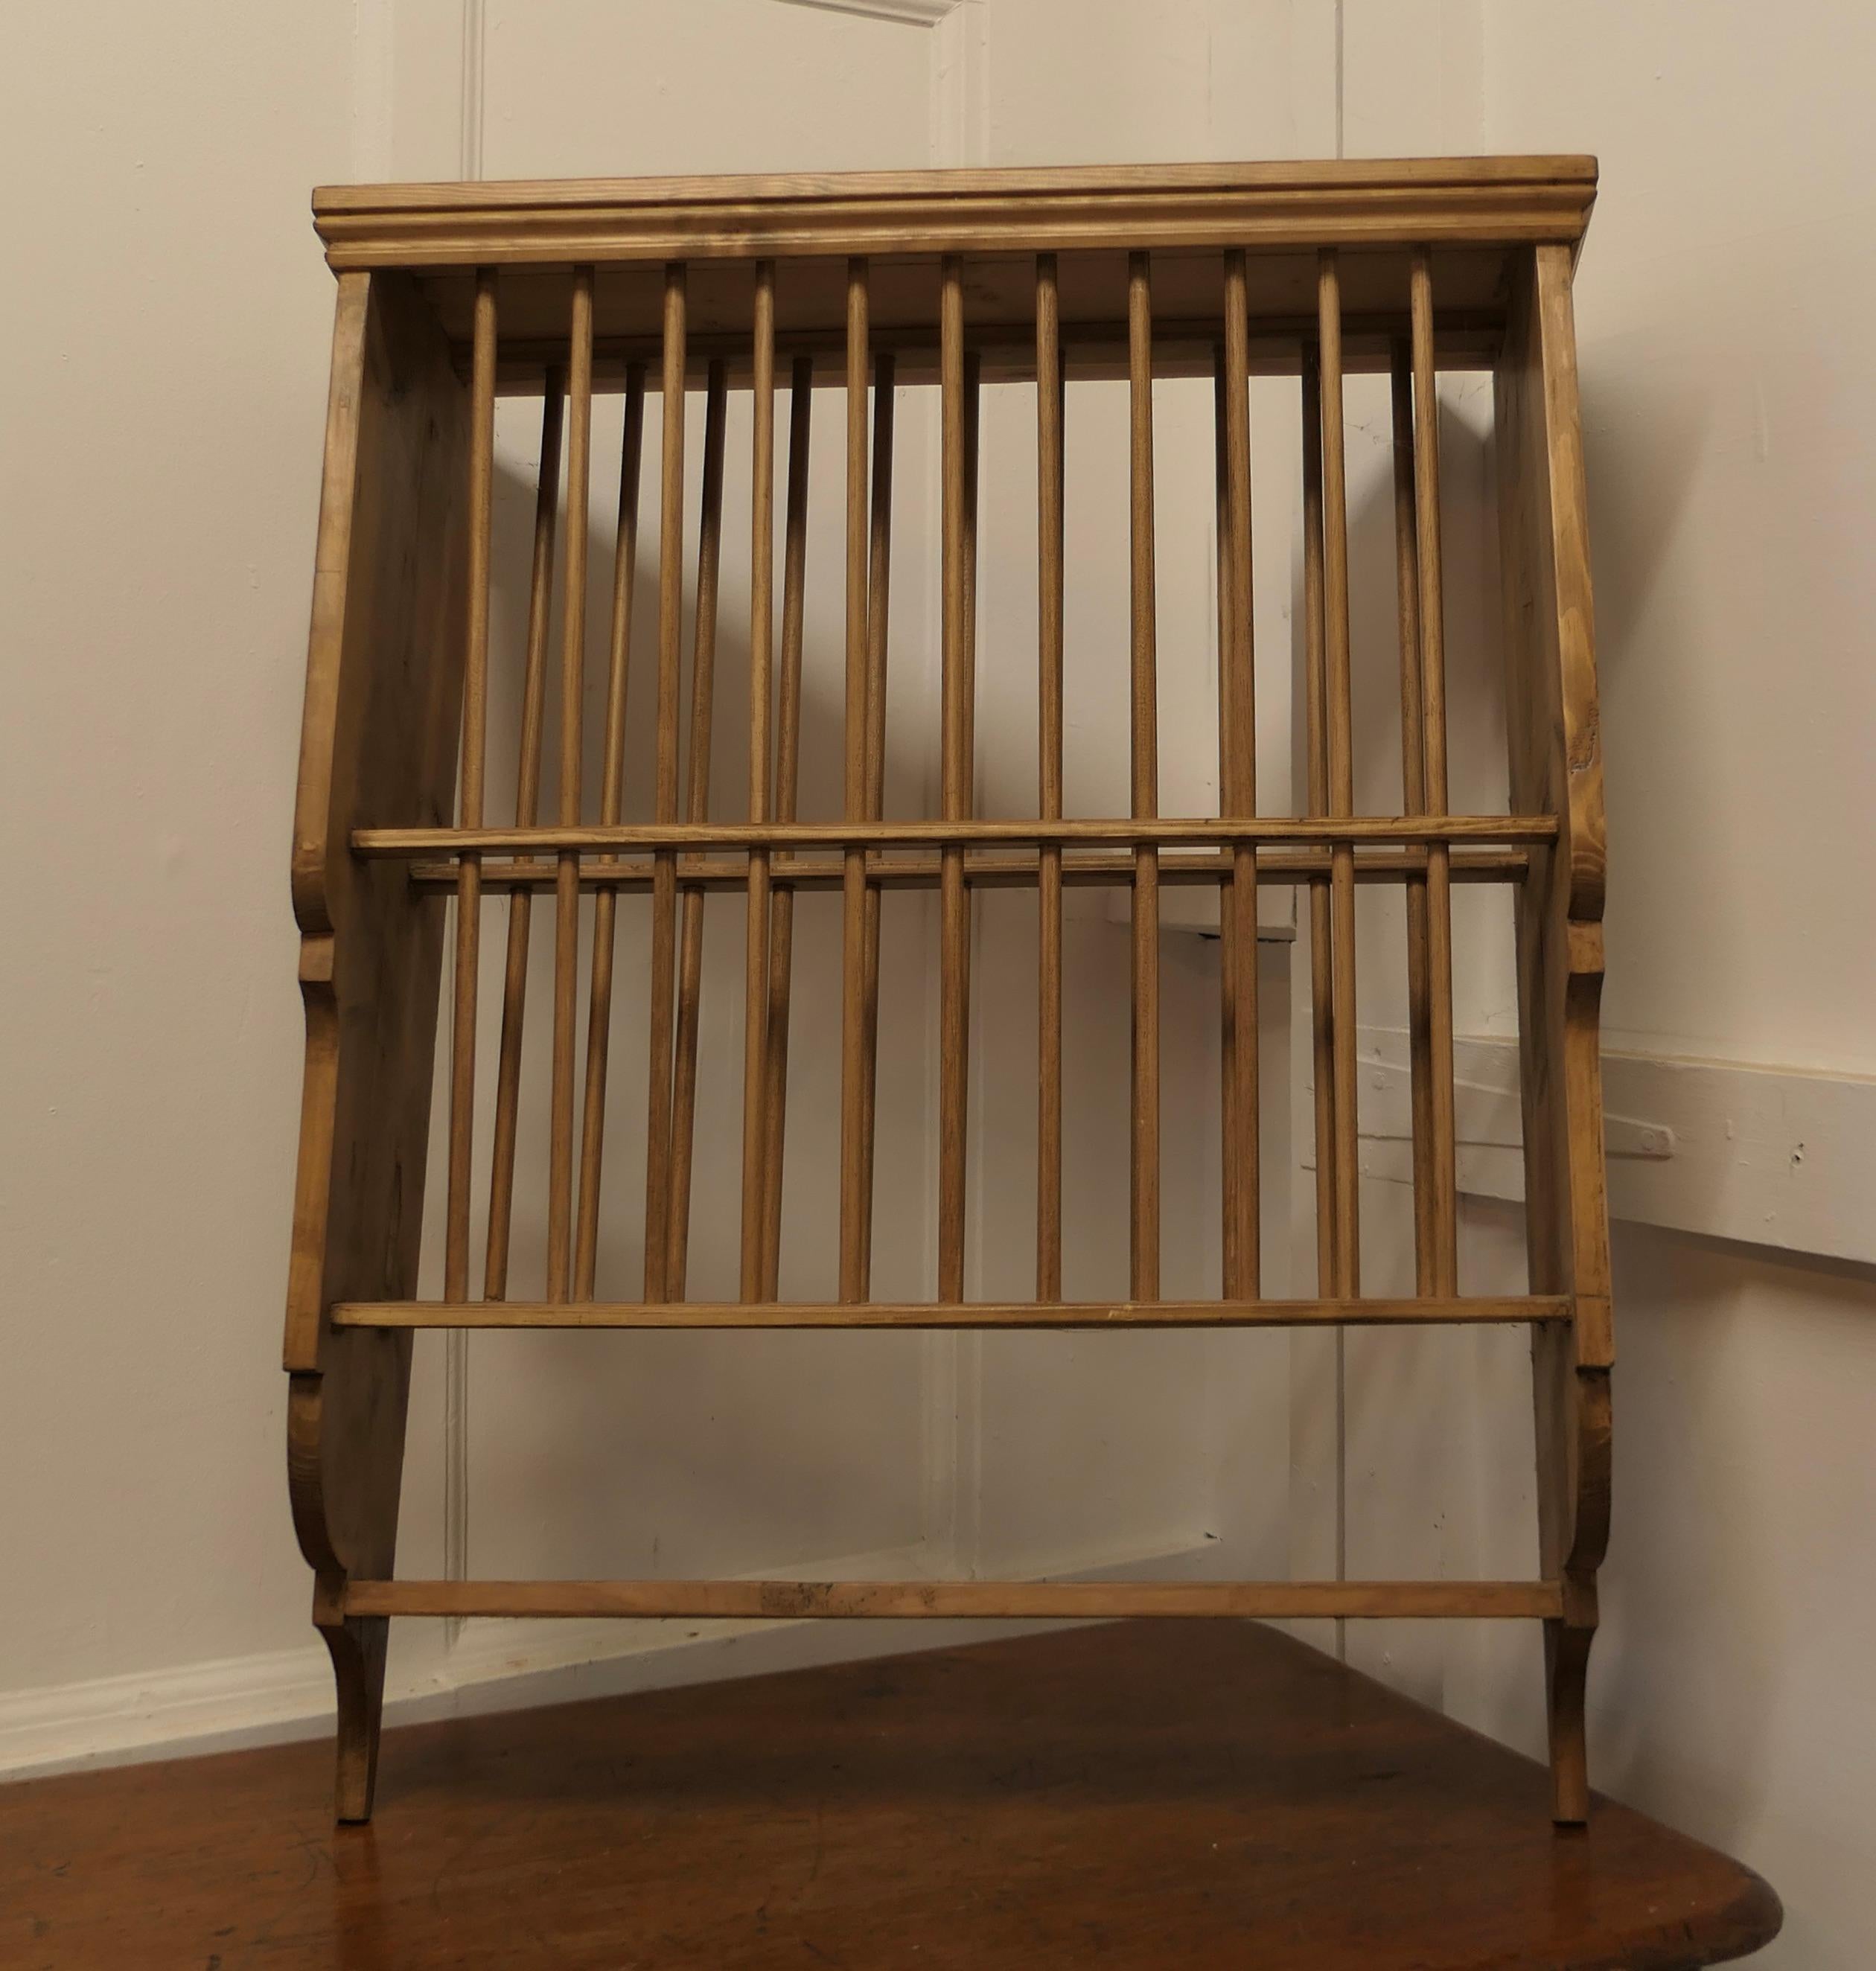 Large Wall Hanging Pine Plate Rack

This useful piece hangs on the wall and drains and stores plates until required
It has a pine frame and wooden dowels with a waterfall shape, allowing 2 rows of plates to be stored at any one time, below there is